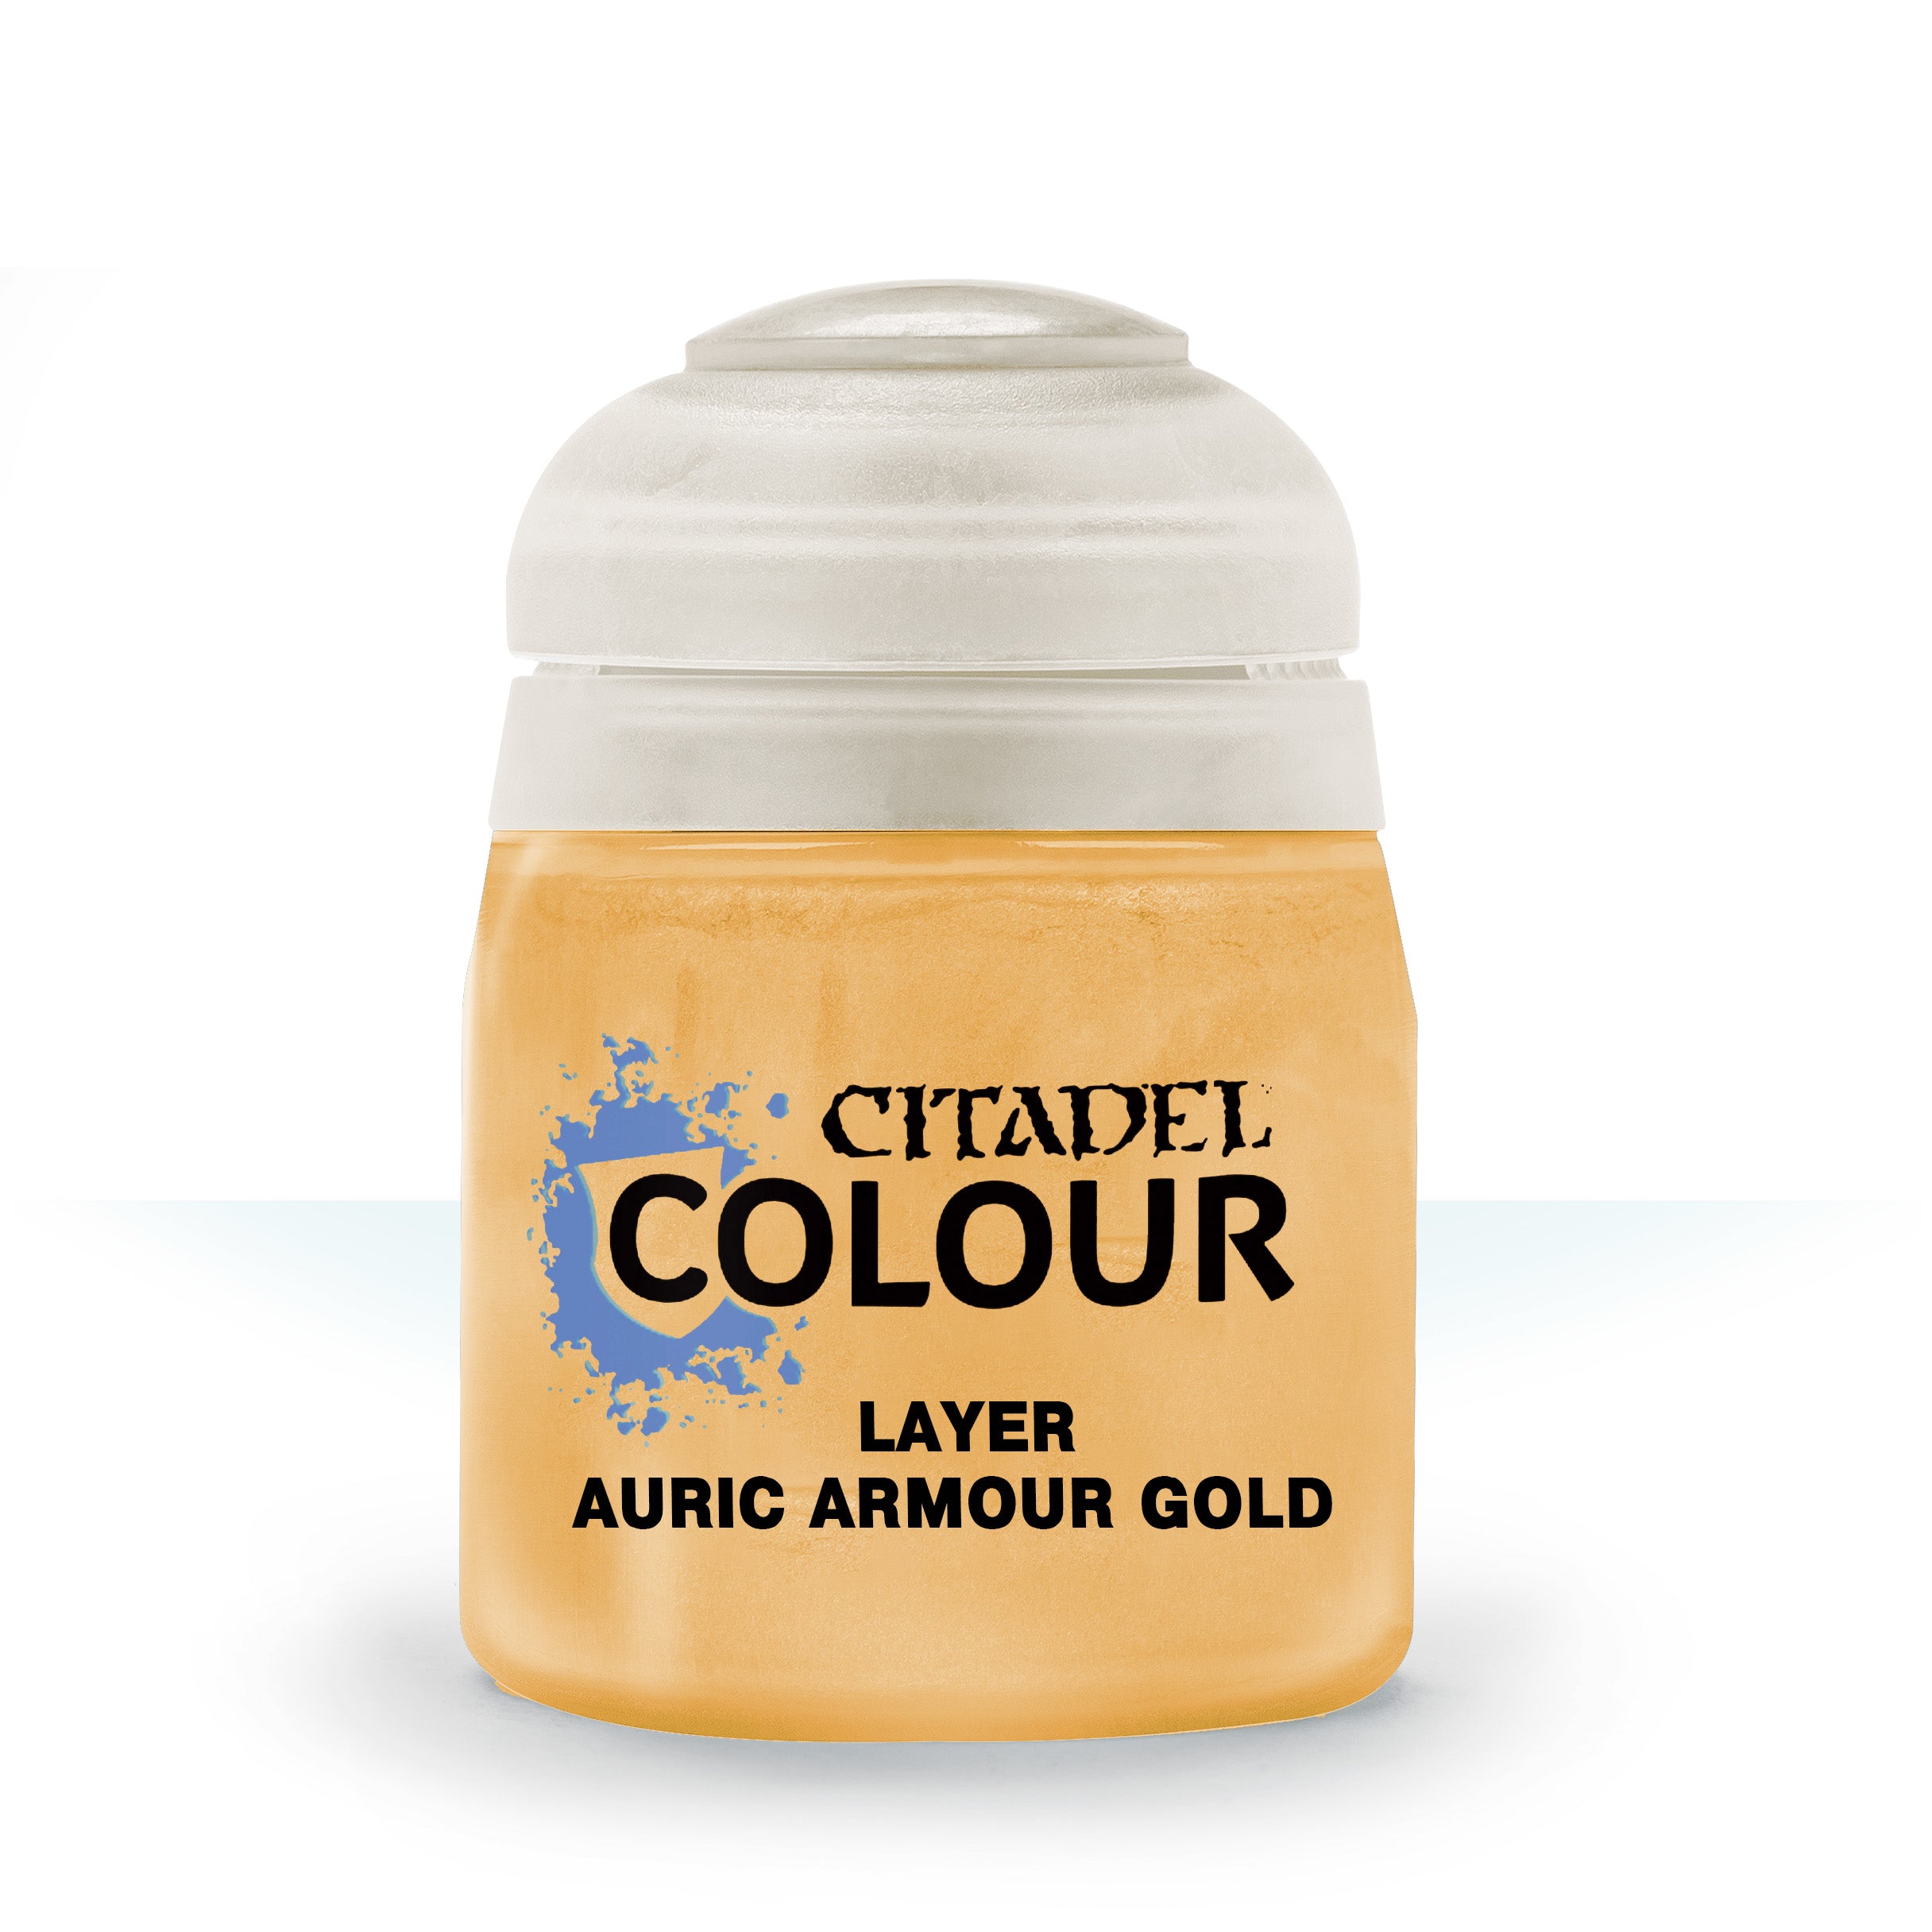 Layer: Auric Armour Gold